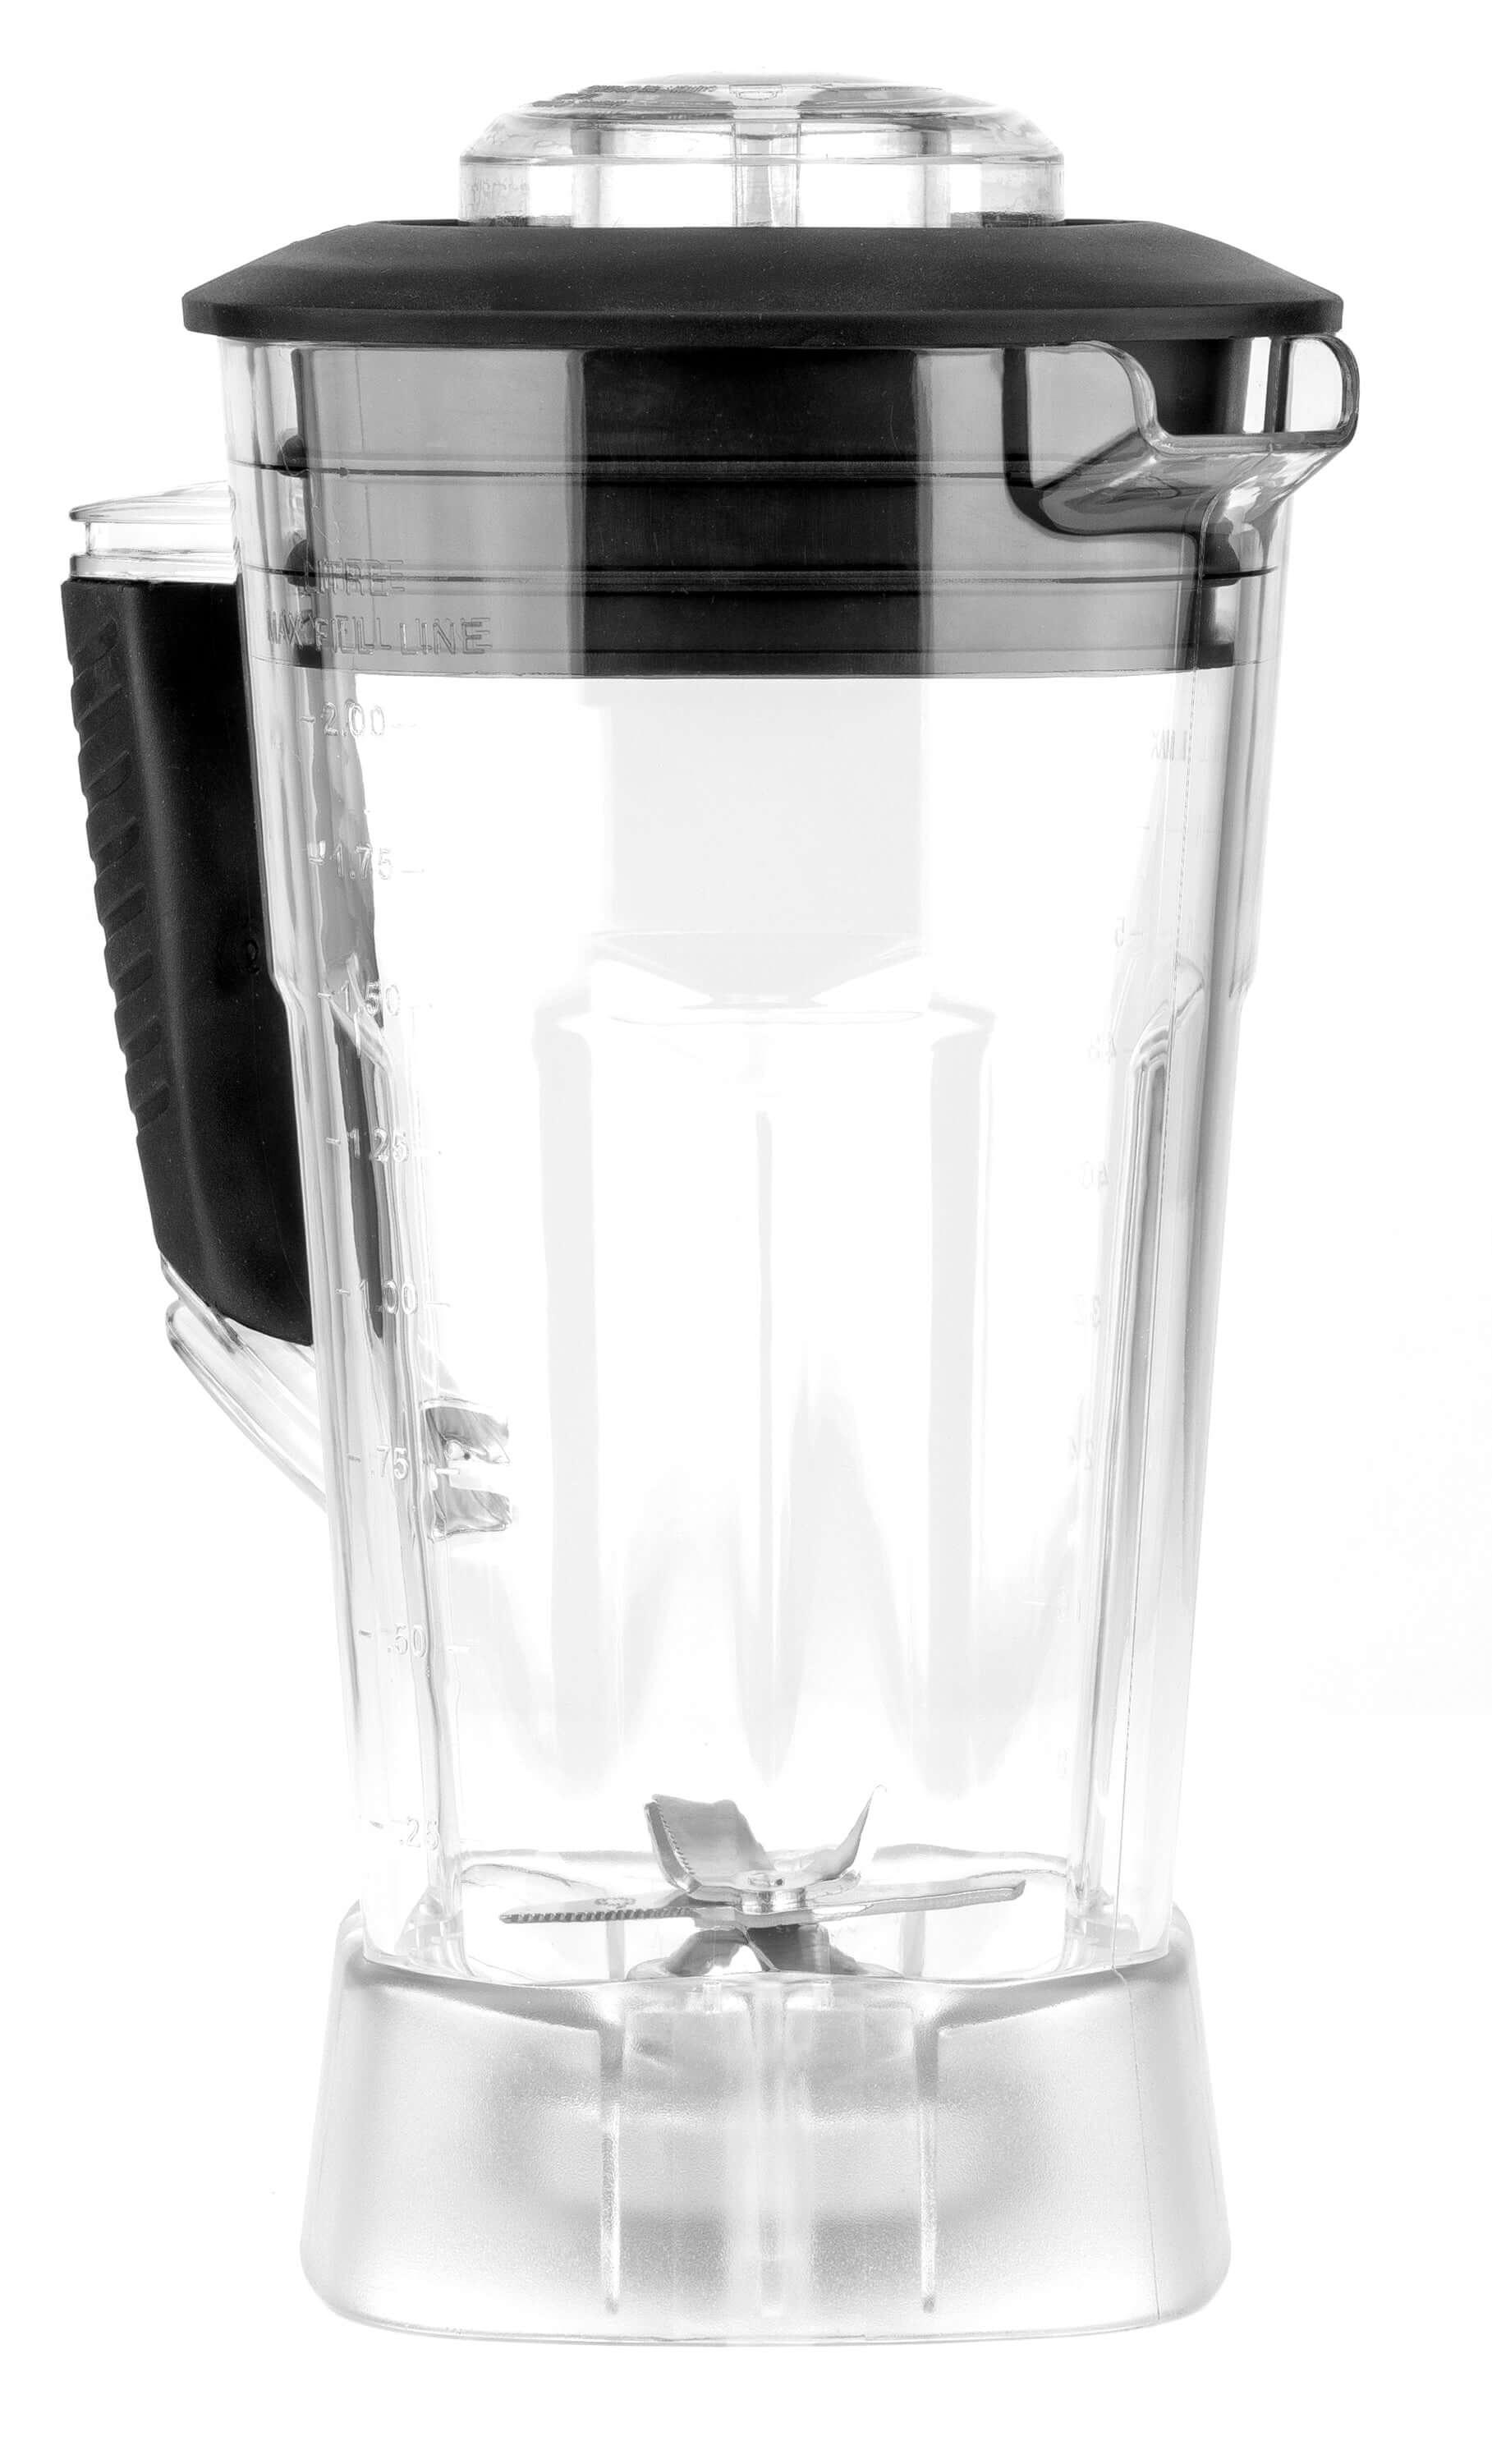 Blender Container 64 Ounce, Replacement for Blender Parts Transparent, Clear